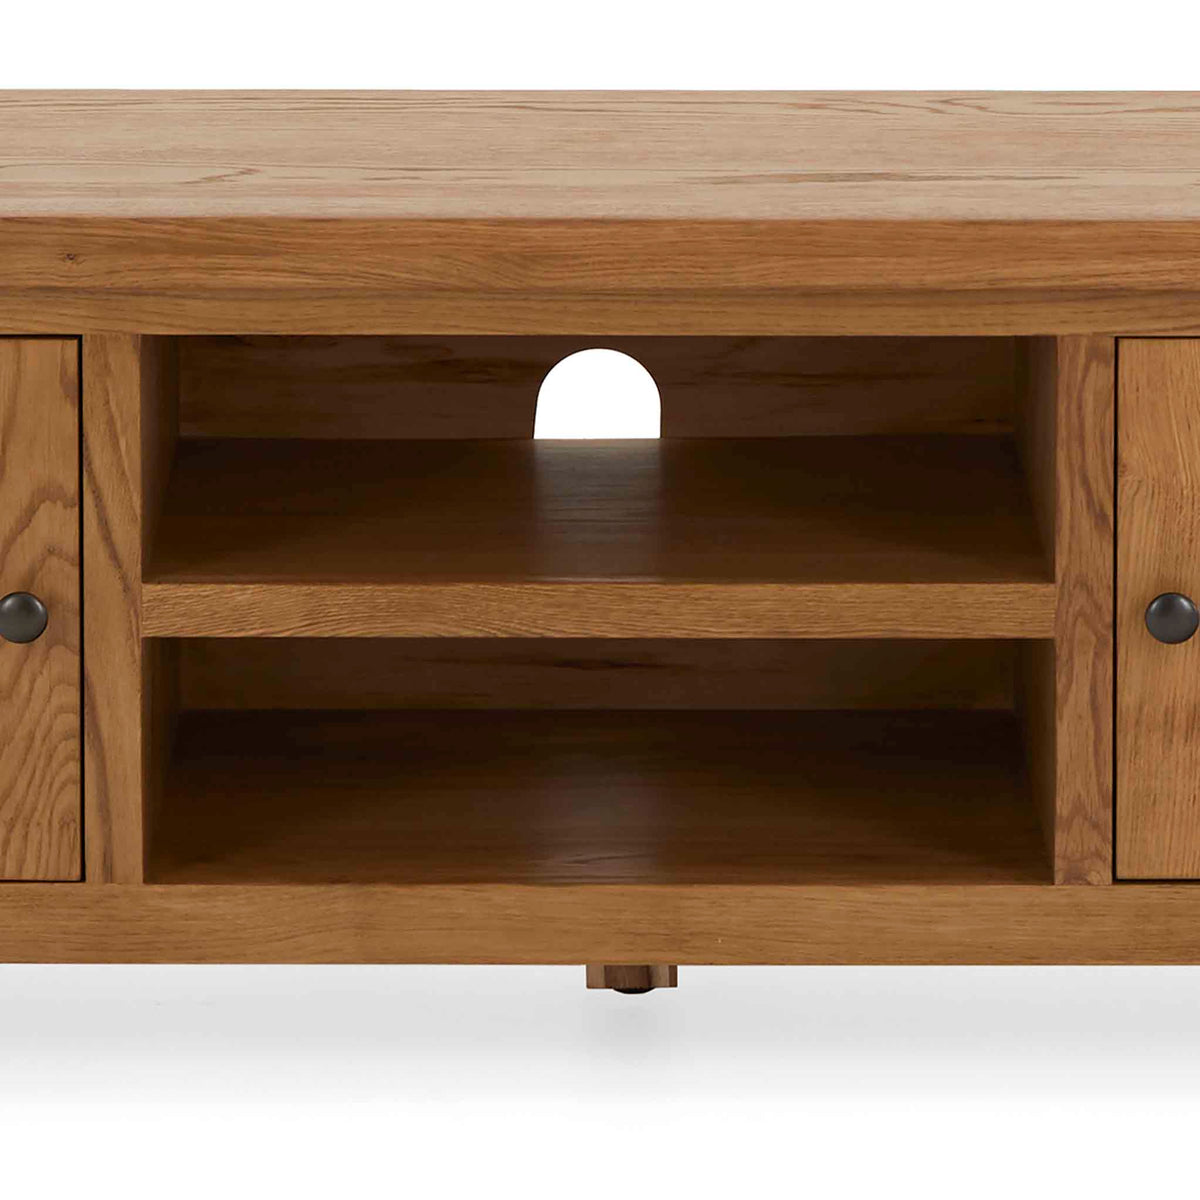 Zelah Oak 150cm TV Stand - Close up of middle shelving and cable access holes